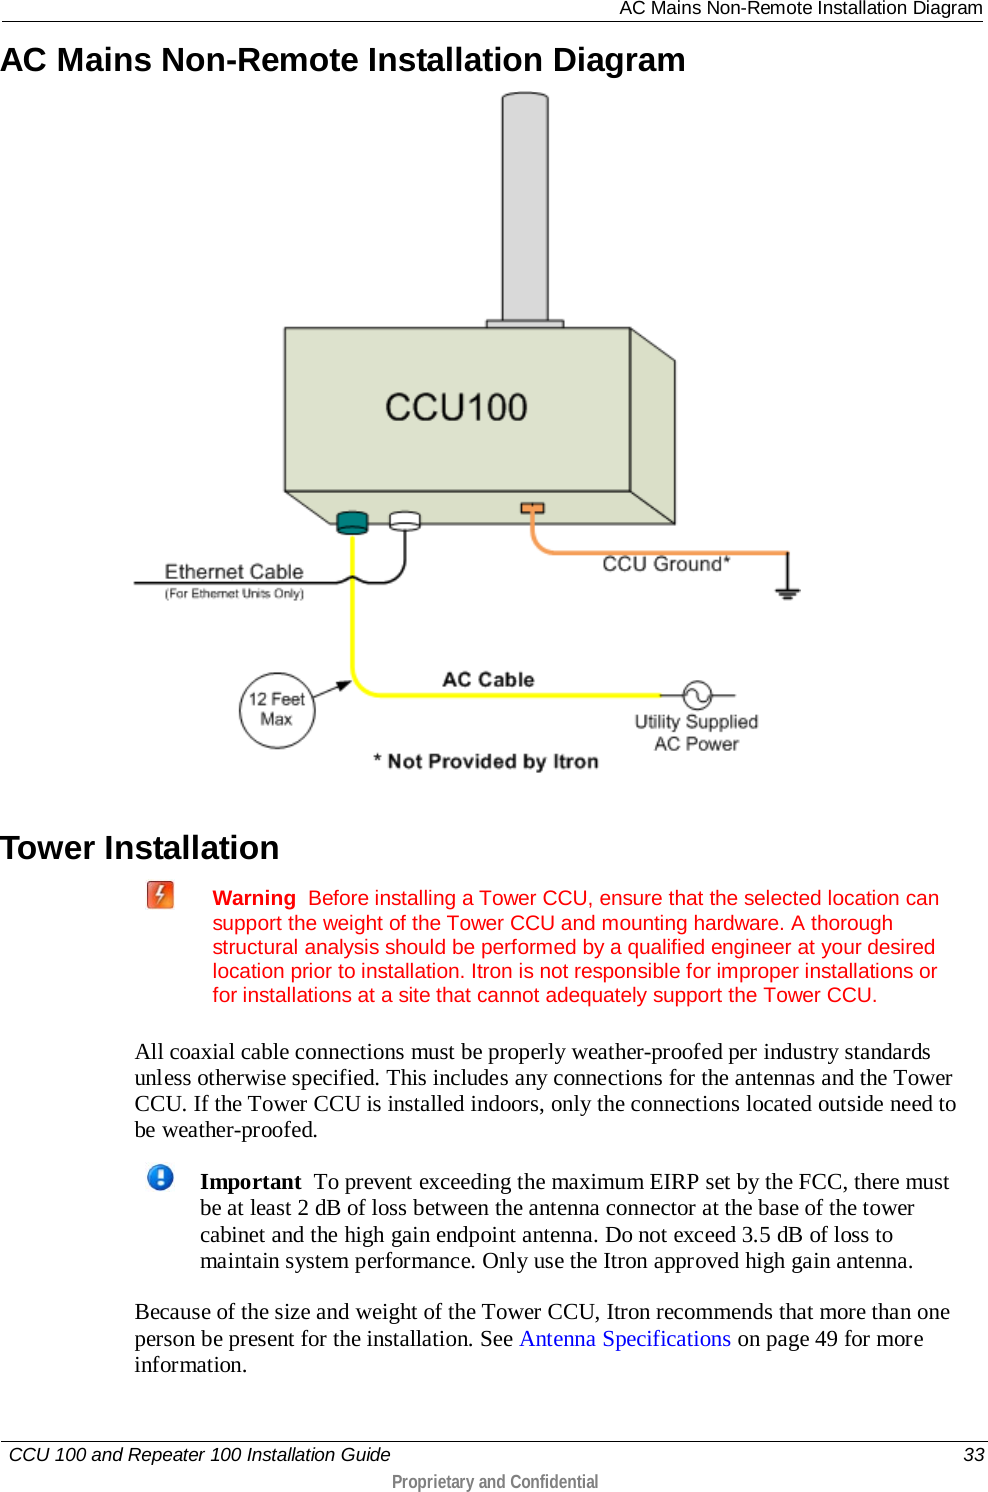  AC Mains Non-Remote Installation Diagram   CCU 100 and Repeater 100 Installation Guide    33  Proprietary and Confidential  AC Mains Non-Remote Installation Diagram   Tower Installation   Warning  Before installing a Tower CCU, ensure that the selected location can support the weight of the Tower CCU and mounting hardware. A thorough structural analysis should be performed by a qualified engineer at your desired location prior to installation. Itron is not responsible for improper installations or for installations at a site that cannot adequately support the Tower CCU.   All coaxial cable connections must be properly weather-proofed per industry standards unless otherwise specified. This includes any connections for the antennas and the Tower CCU. If the Tower CCU is installed indoors, only the connections located outside need to be weather-proofed.   Important  To prevent exceeding the maximum EIRP set by the FCC, there must be at least 2 dB of loss between the antenna connector at the base of the tower cabinet and the high gain endpoint antenna. Do not exceed 3.5 dB of loss to maintain system performance. Only use the Itron approved high gain antenna. Because of the size and weight of the Tower CCU, Itron recommends that more than one person be present for the installation. See Antenna Specifications on page 49 for more information. 